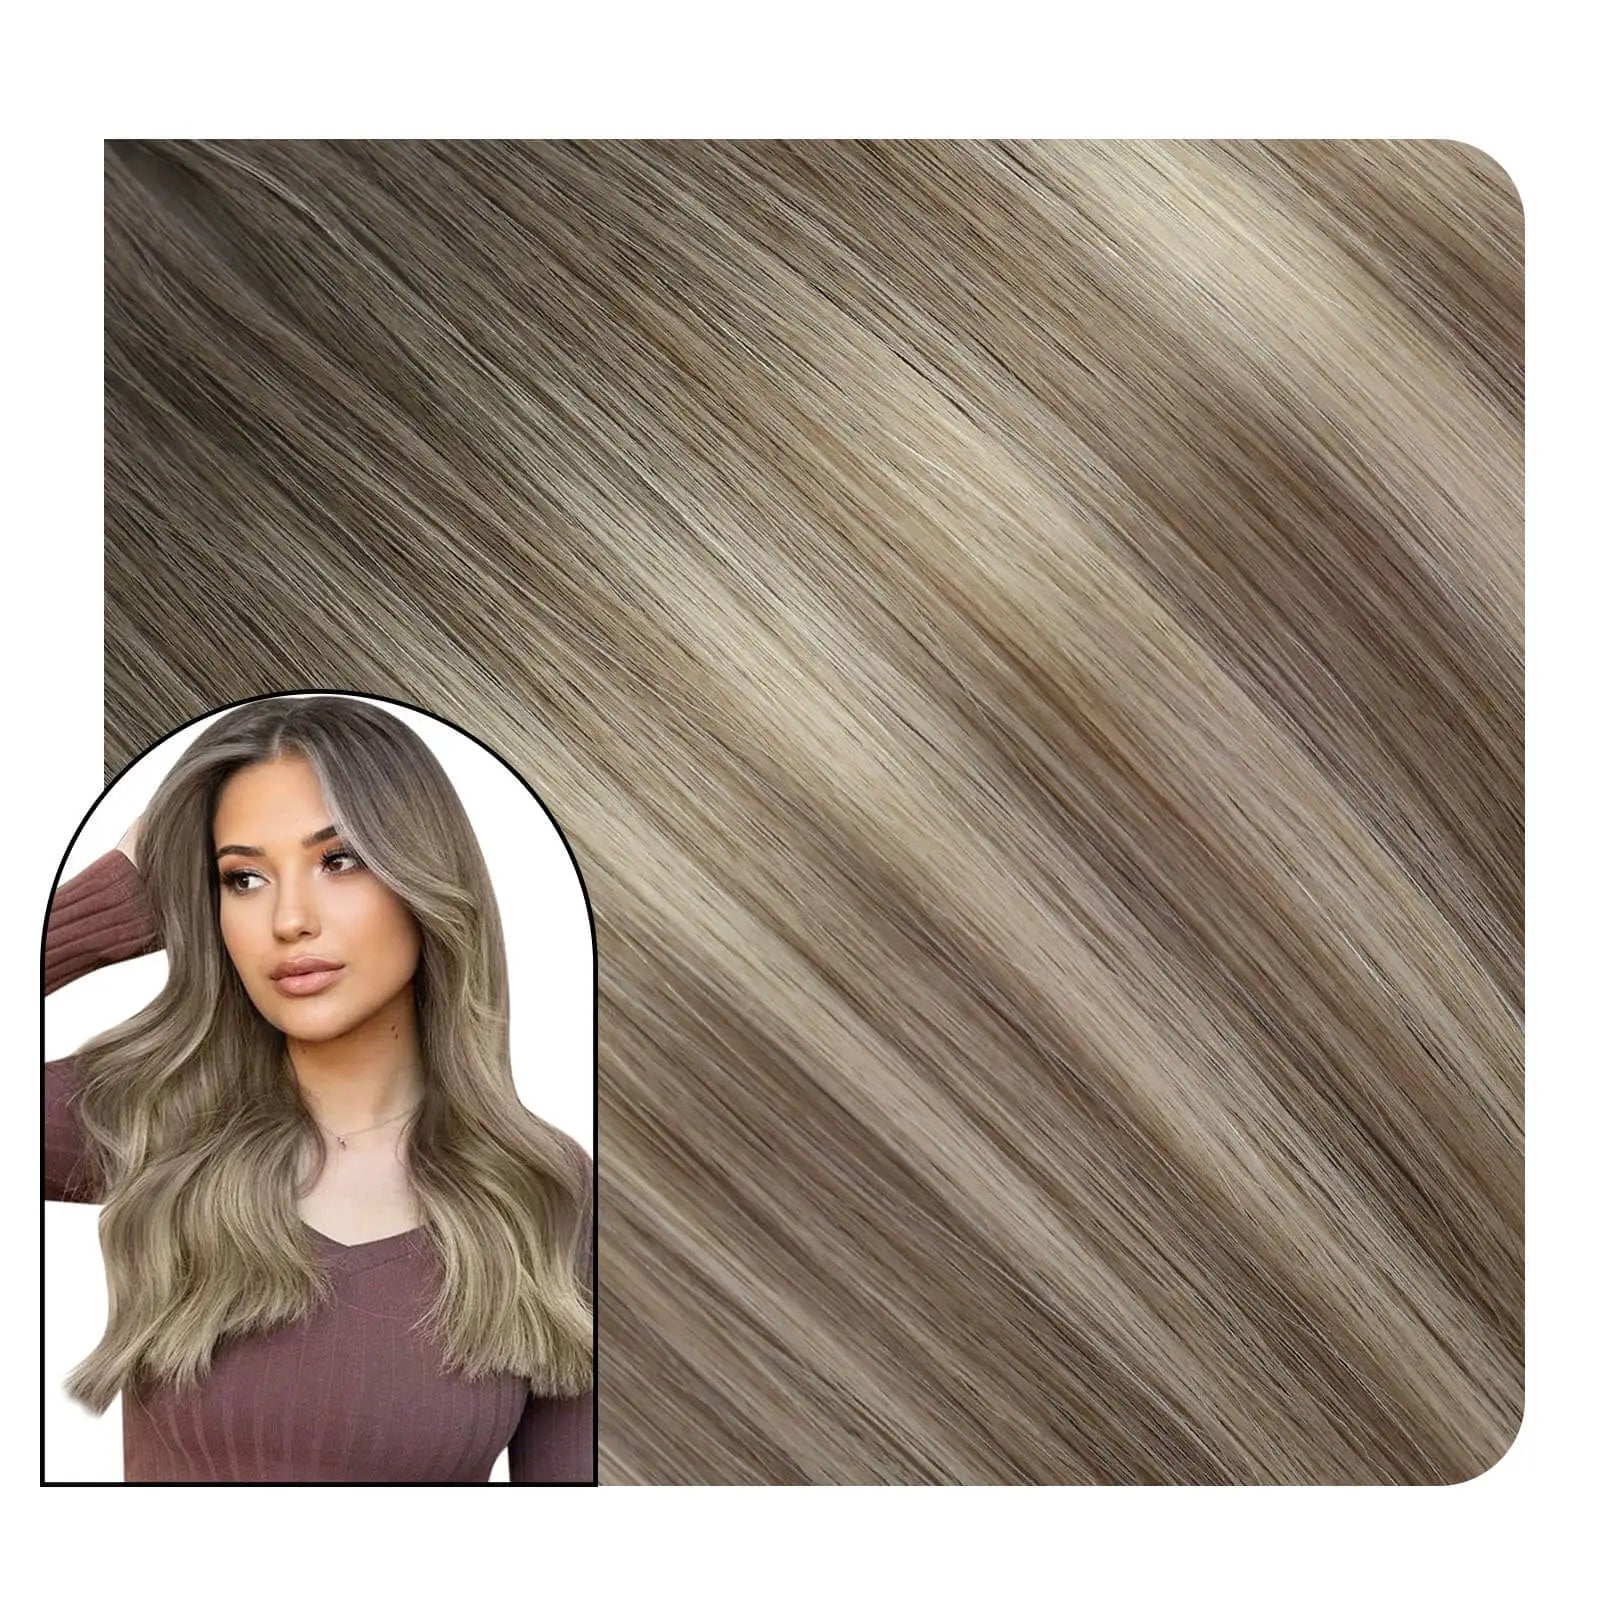 Virgin Injected Tape in Hair Extensions Sliky Straight Balayage Brown Blonde Hair